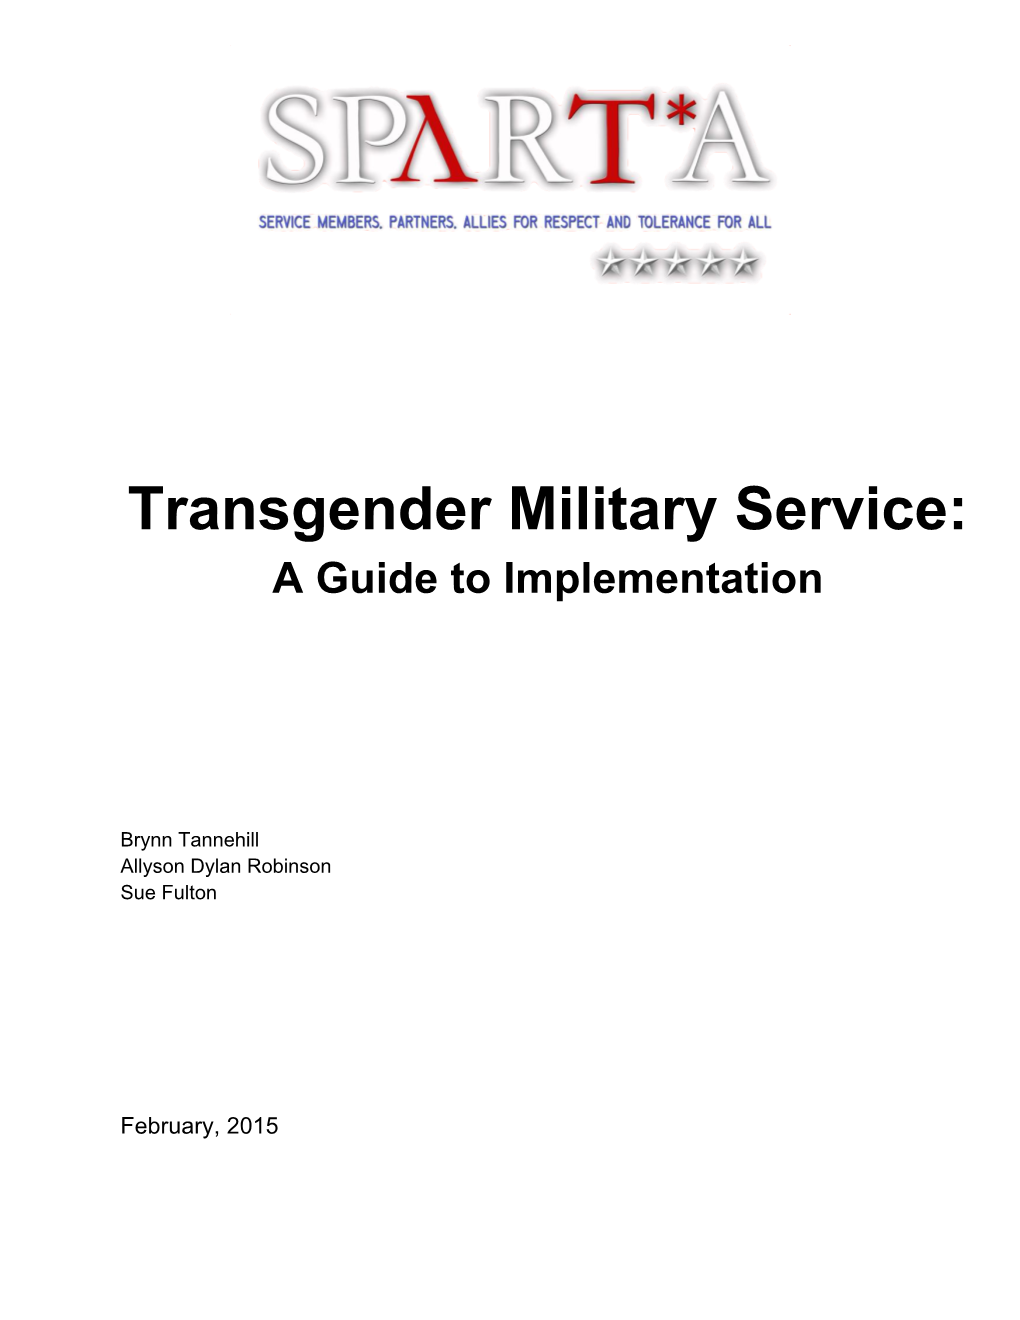 Transgender Military Service: a Guide to Implementation